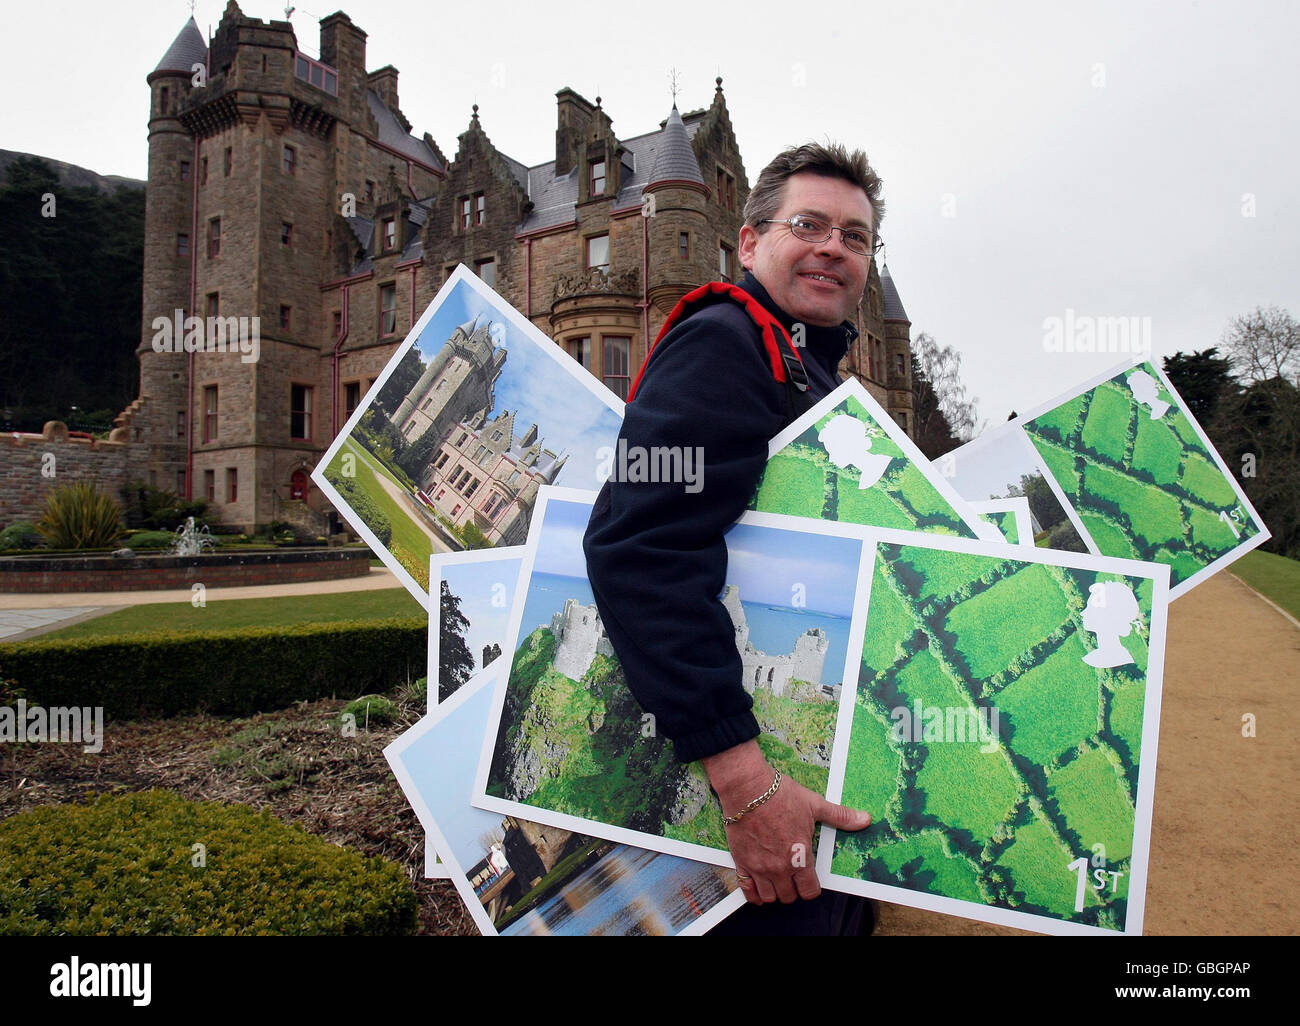 Royal Mail postman Stephen Hunsdale at the launch of Royal Mail's new designs for a set of Royal Mail stamps depicting the Castles of Northern Ireland, at Belfast Castle. Stock Photo